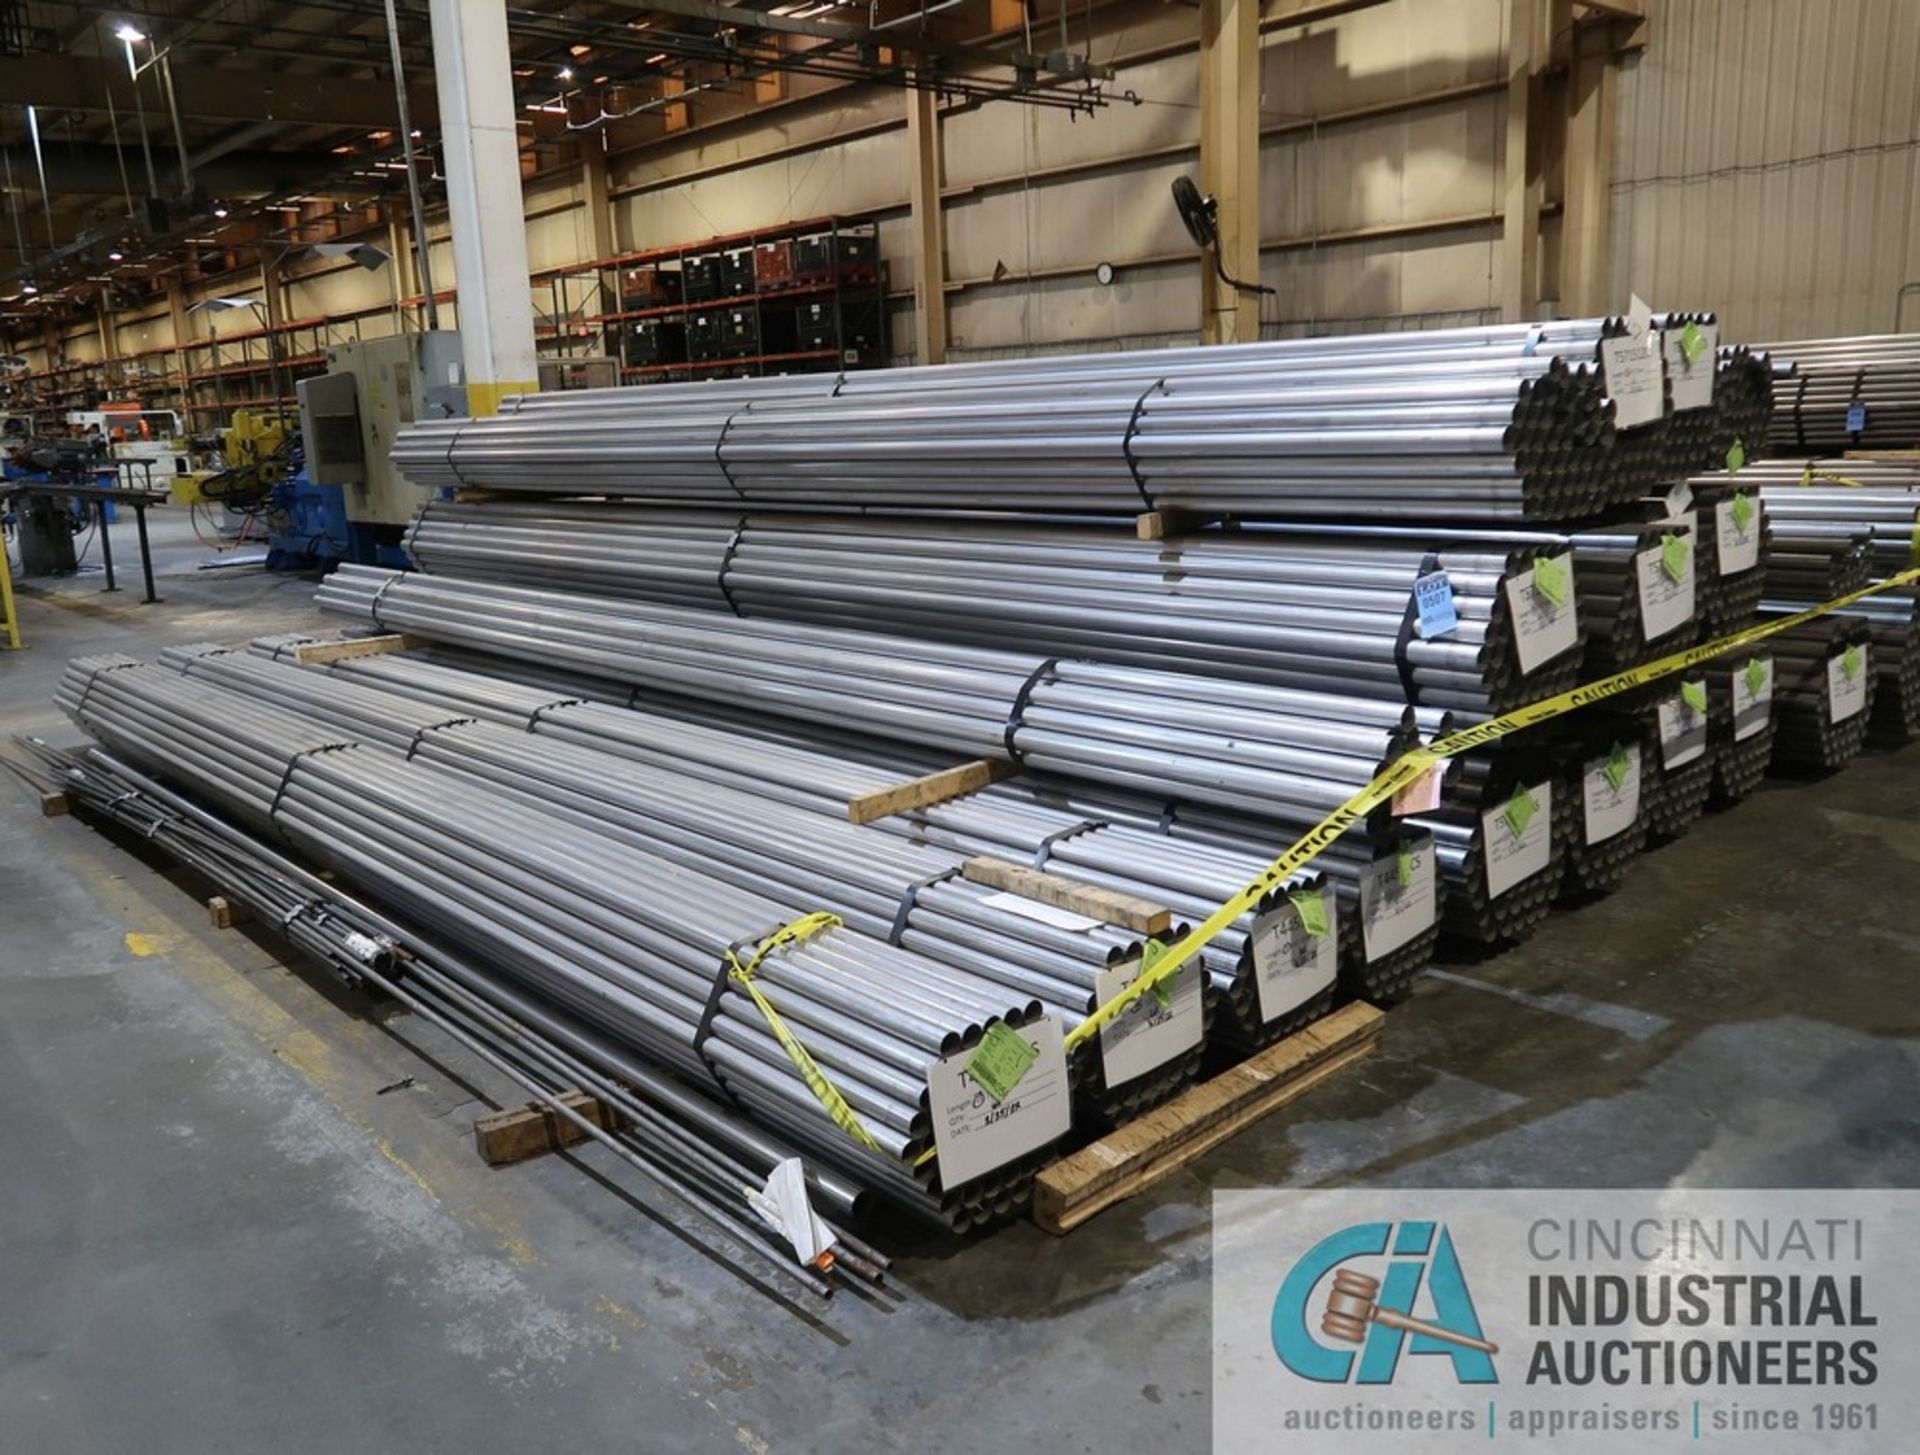 (LOT) (21) BUNDLES OF 20' LONG X .065 ALUMINIZED STEEL TUBING, APPROX. 1,200 TOTAL PIECES, APPROX. - Image 2 of 7